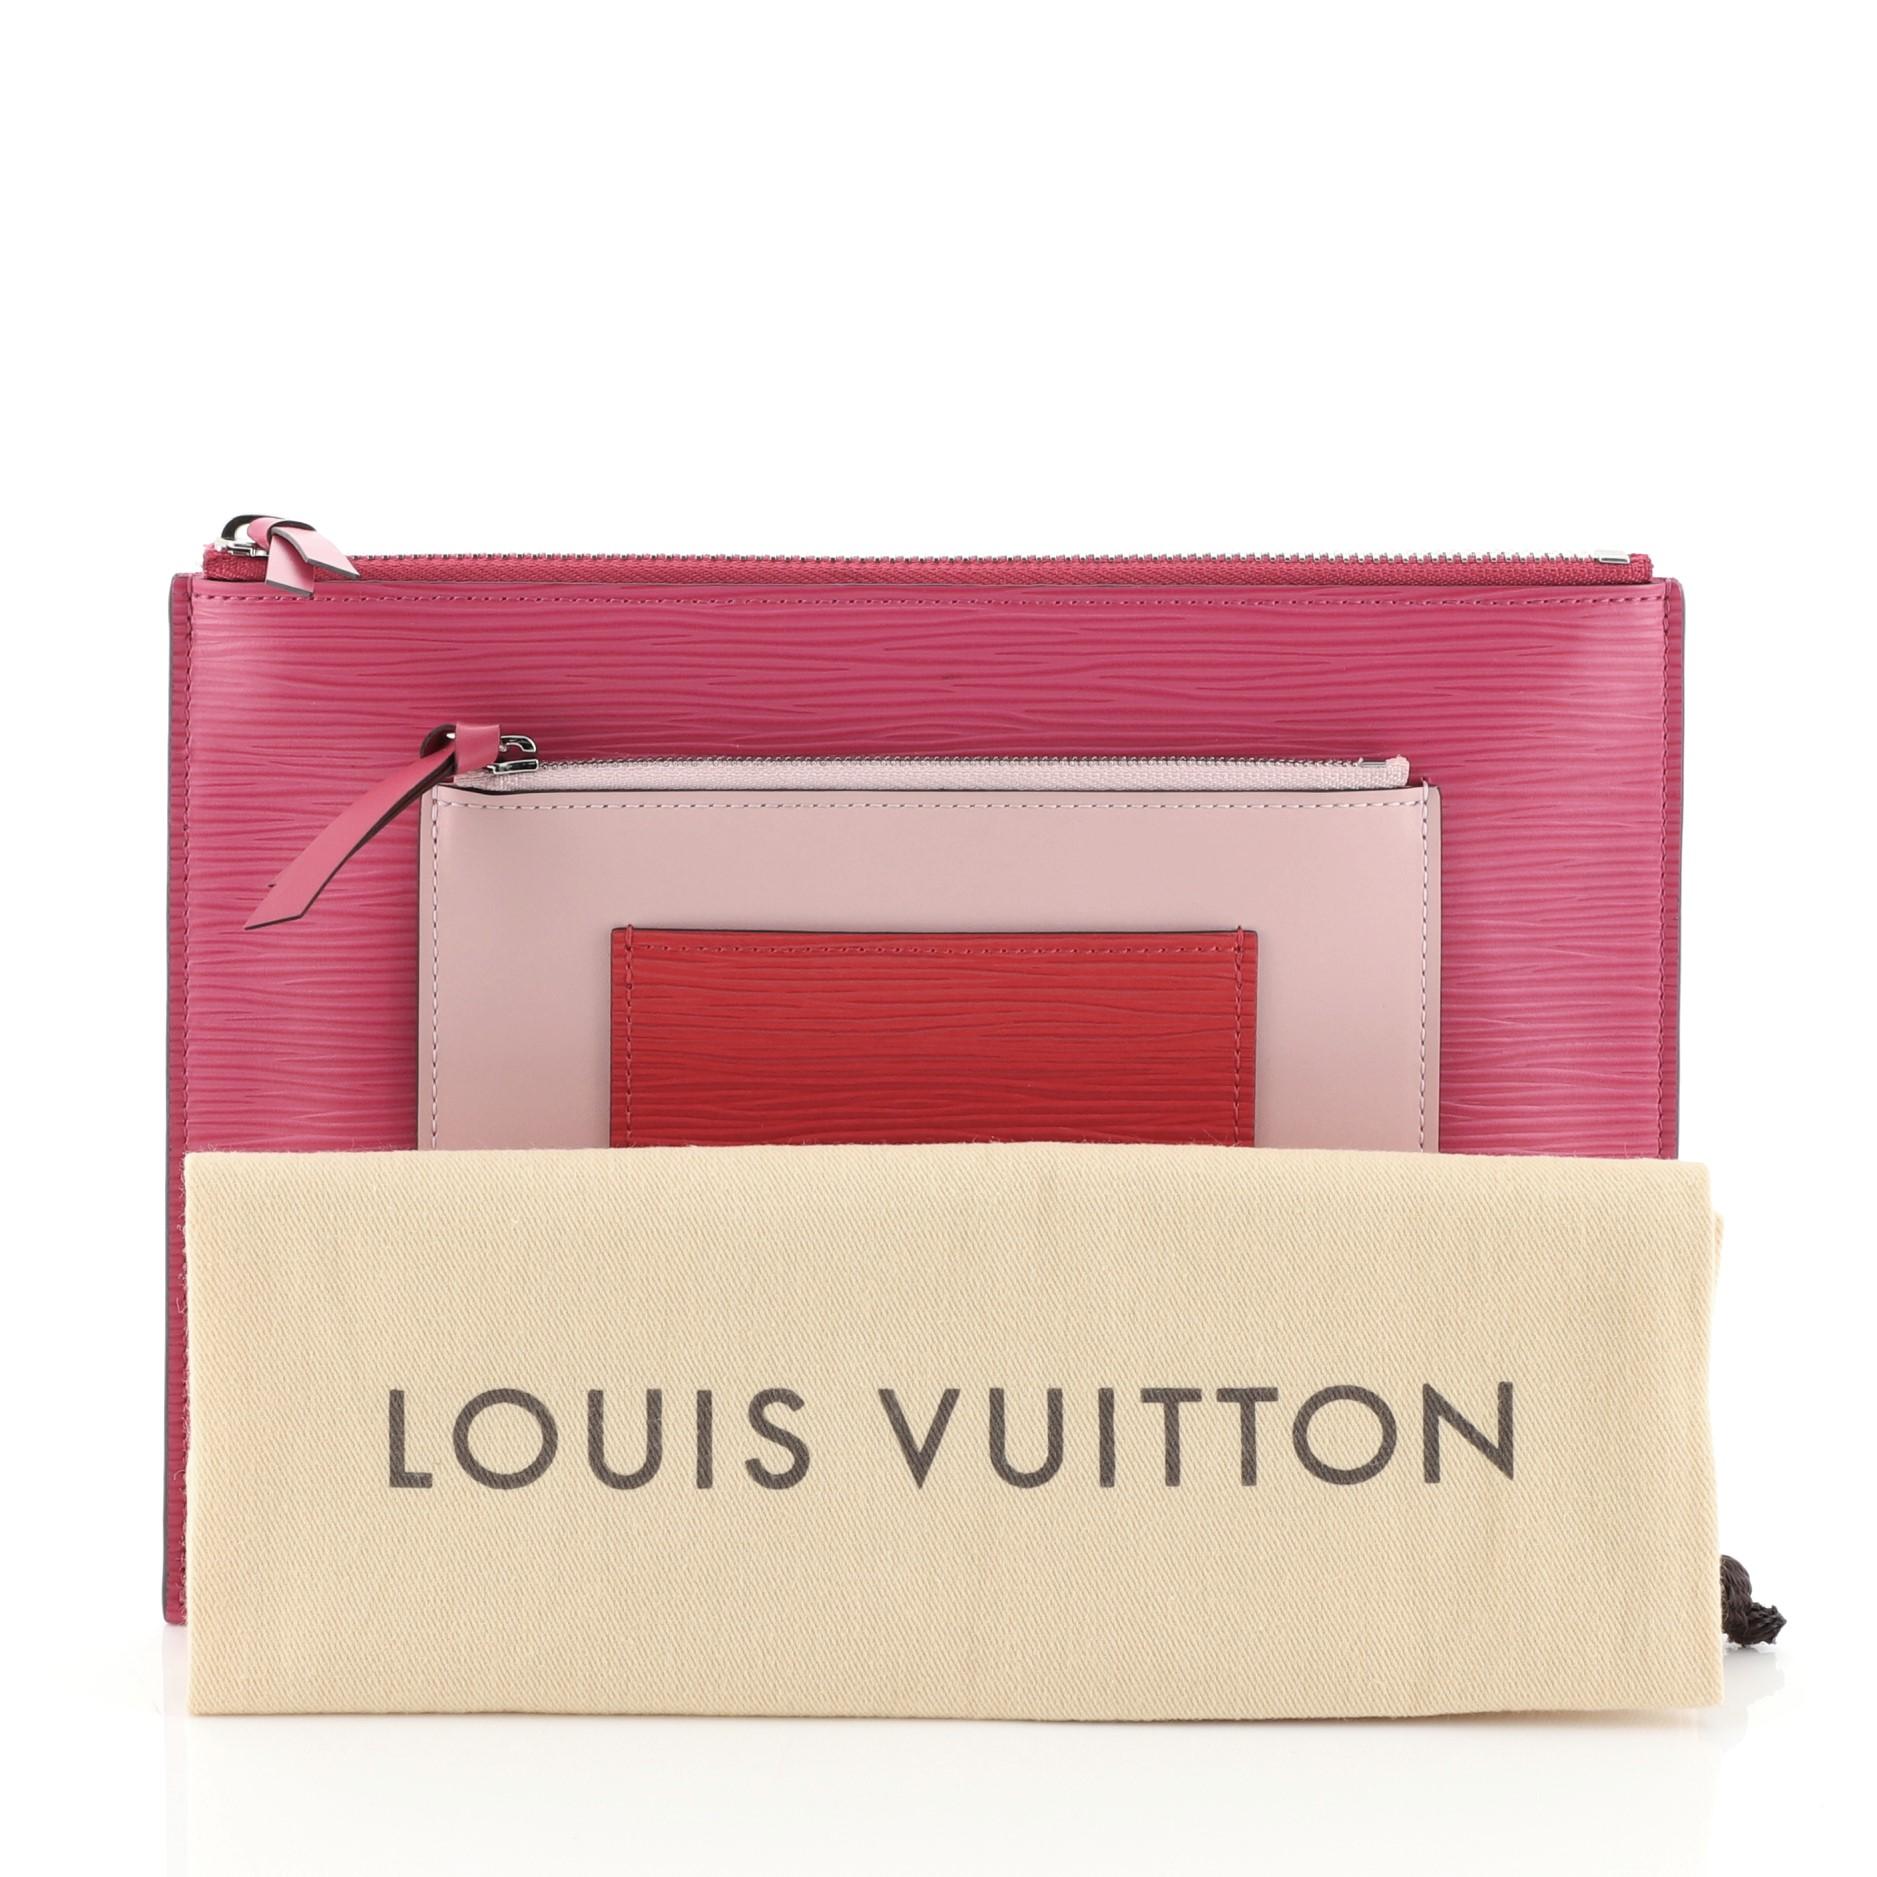 This Louis Vuitton Pochette Pratt Epi Leather, crafted in pink leather, features exterior zip pocket and silver-tone hardware. Its zip closure opens to a pink microfiber interior. Authenticity code reads: UB4166.

Condition: Excellent. Minor wear on